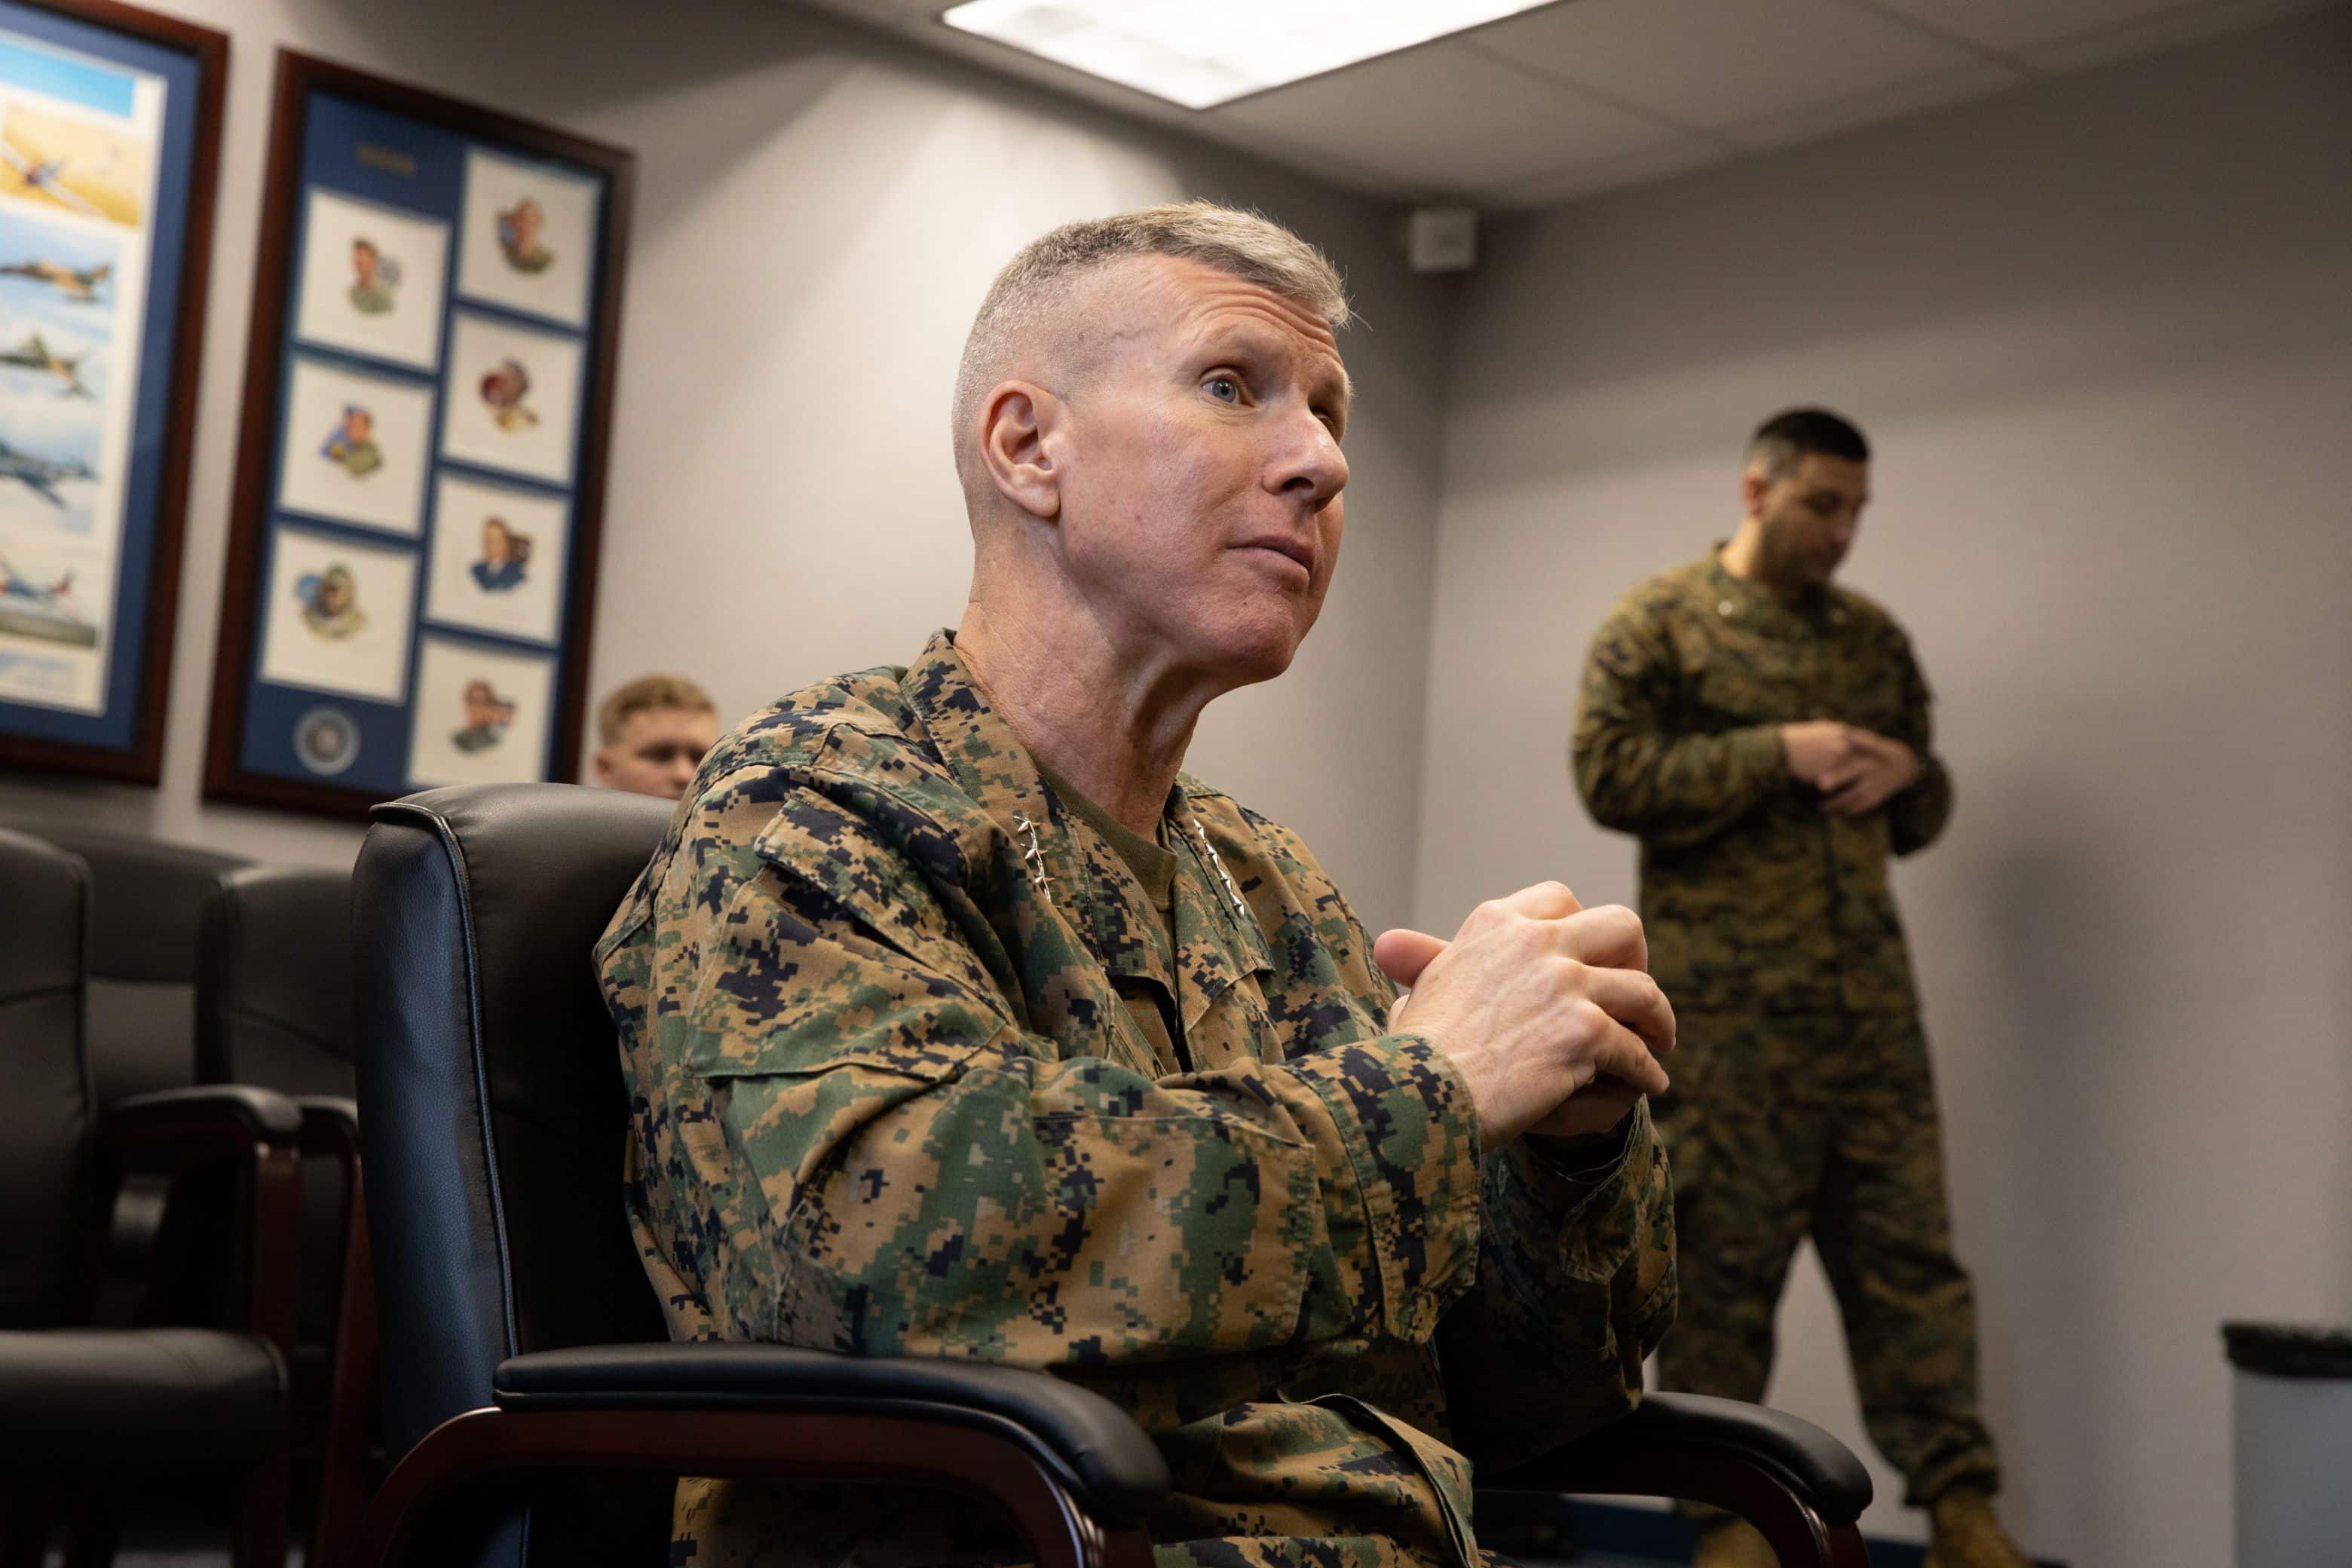 U.S. Marine Gen. Eric M. Smith, the Assistant Commandant of the Marine Corps, speaks to Marines from Marine Corps Recruiting Station Montgomery and Weapons Company, 3rd Battalion 23rd Marines at Maxwell Air Force Base in Montgomery, Alabama, Feb. 10, 2023. The purpose of this visit was to communicate with the Marines to address questions and concerns about improving the force. (U.S. Marine Corps photo by Sgt. Shannon Doherty)